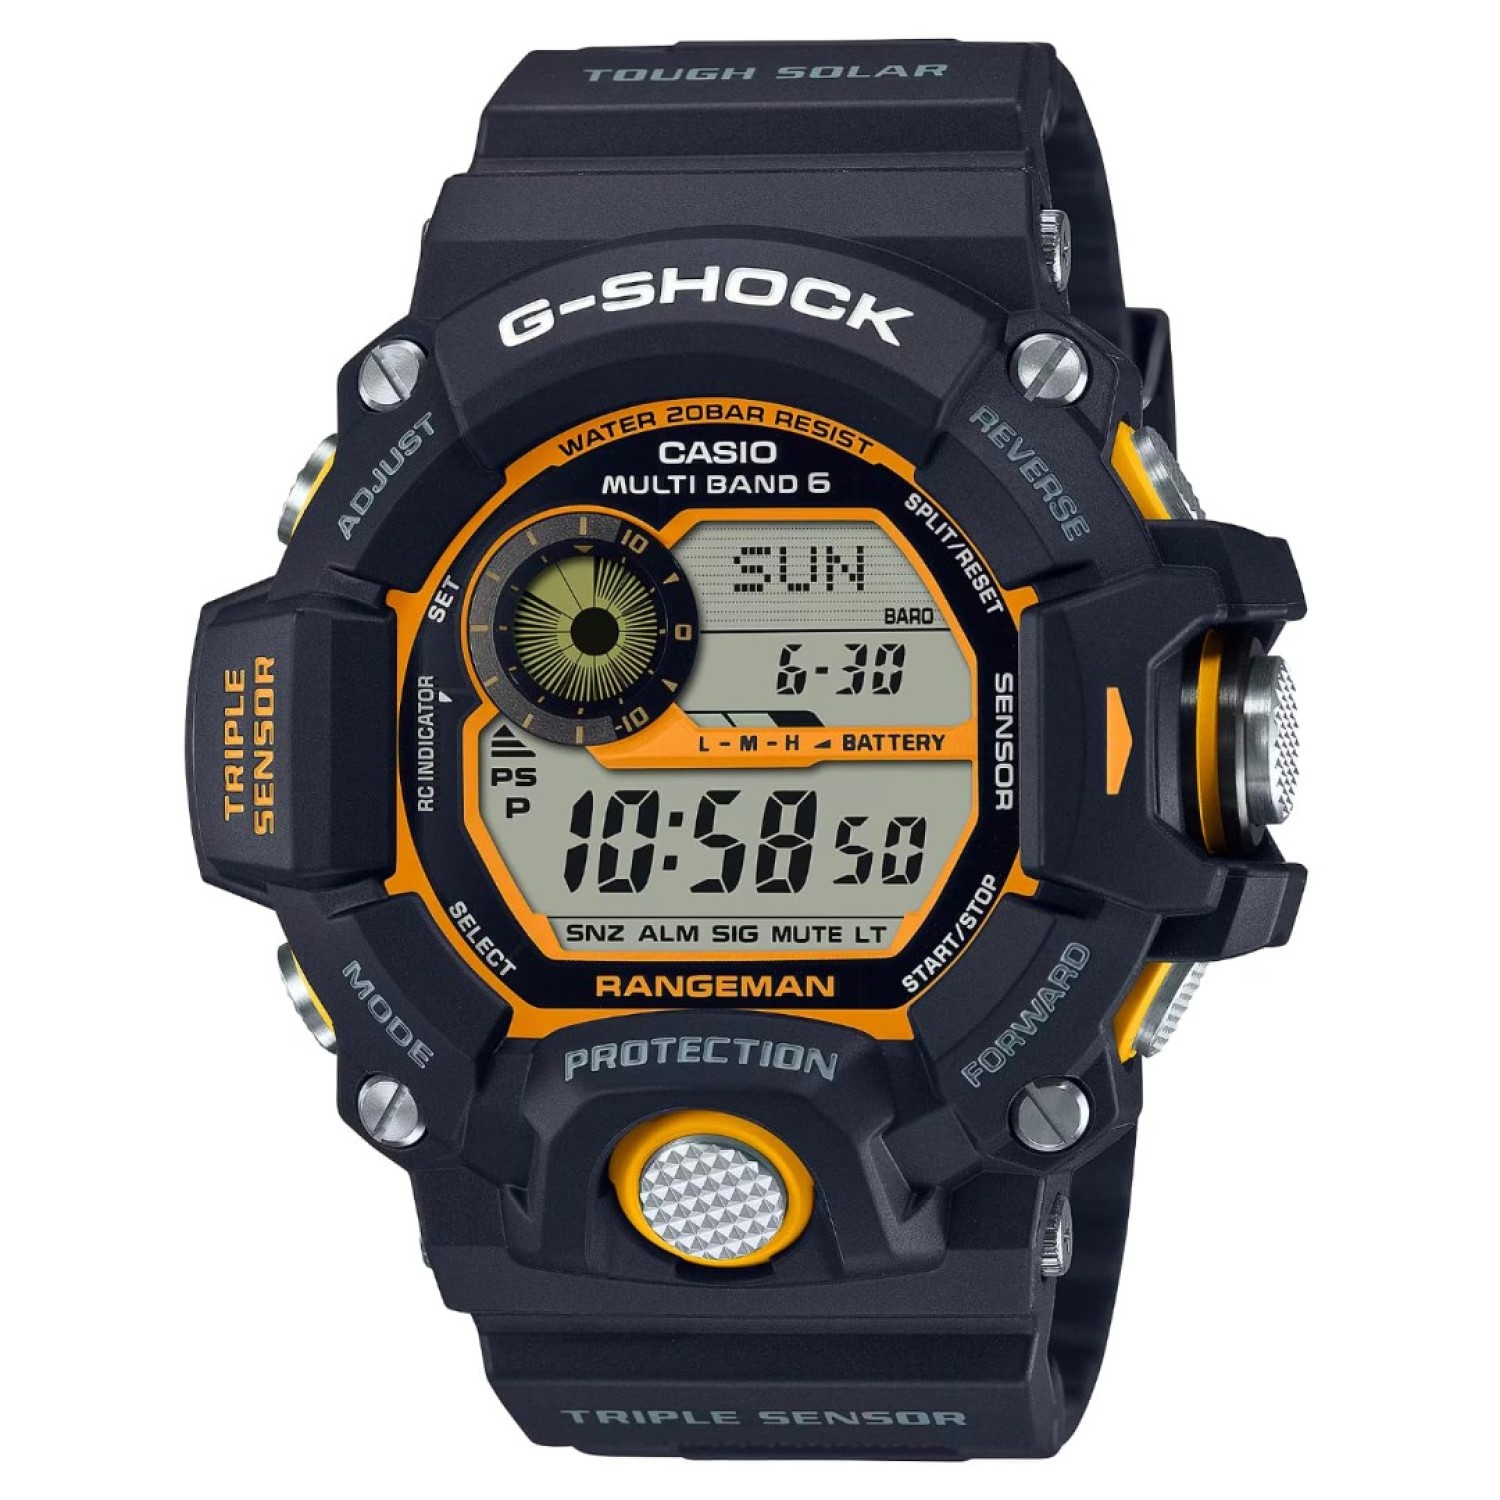 GW9400Y-1D G-Shock Master of G - Rangeman. The GW9400 RANGEMAN is equipped with Triple Sensor to deliver altitude, direction, temperature and barometric pressure readings directly to your wrist.